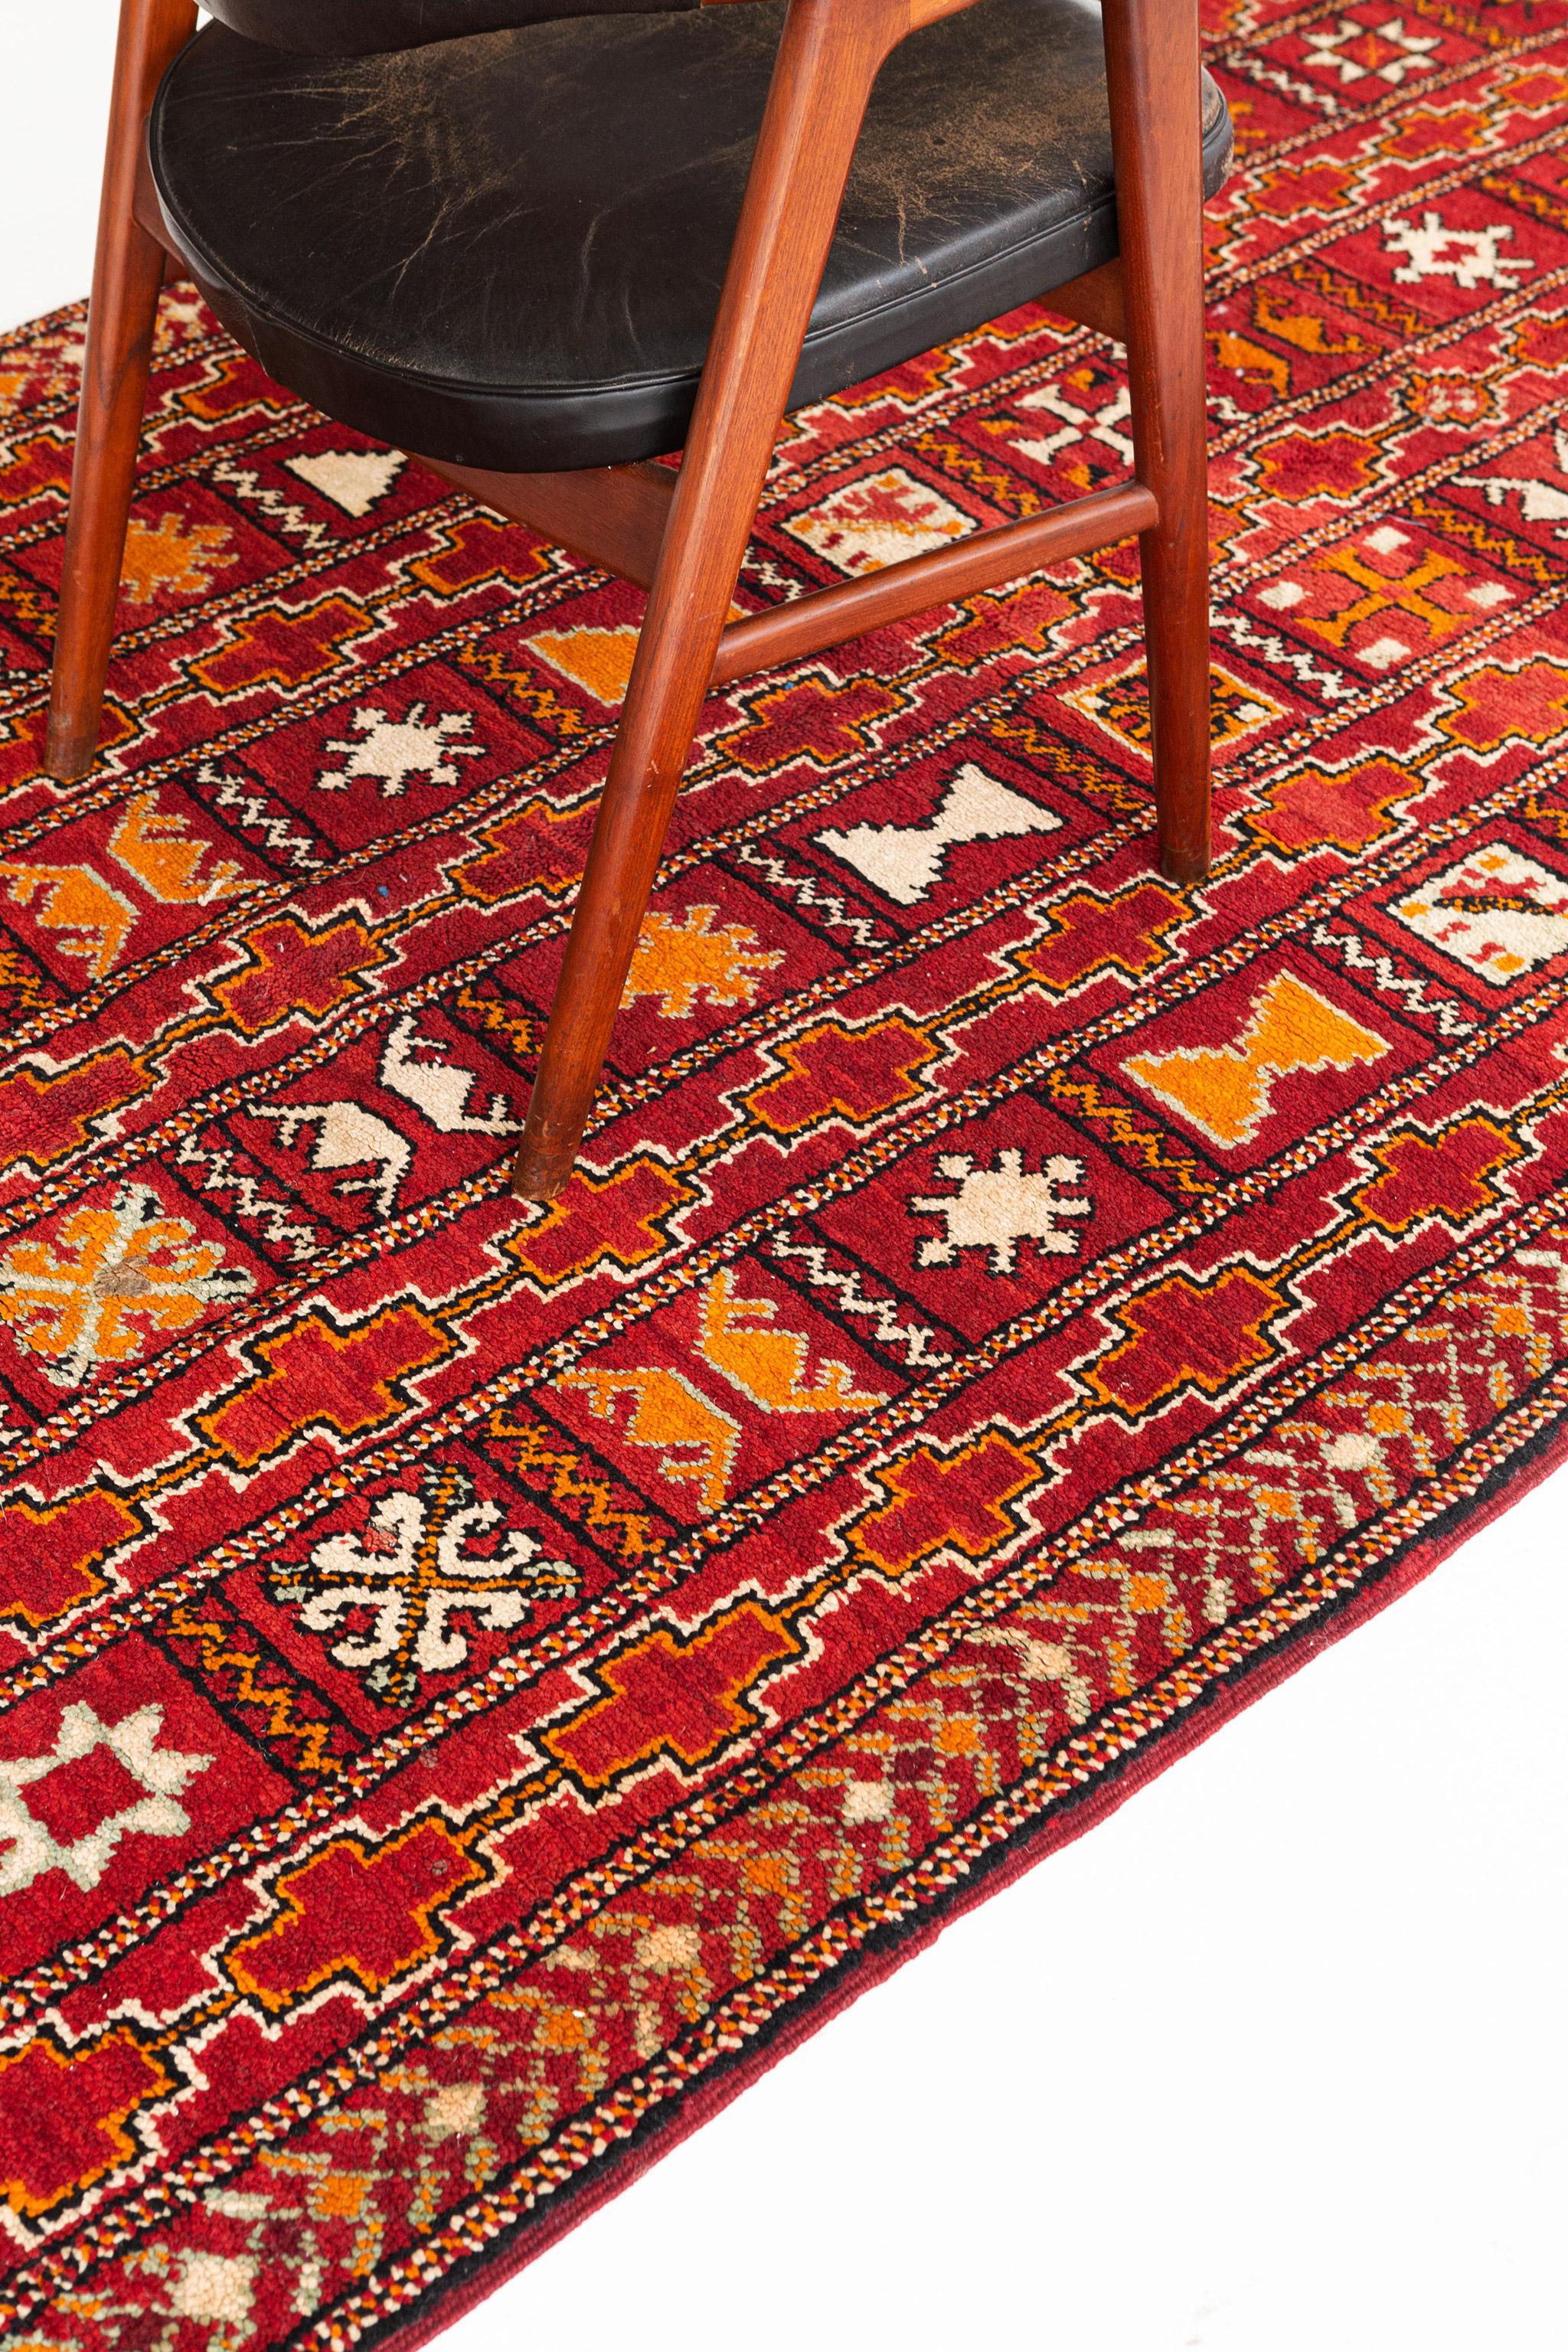 Bold ruby red field with rows and columns of expertly rendered motifs in orange, black, ivory, and pale gray-green. This is a fine vintage tribal piece from the High Atlas Mountains of Morocco.